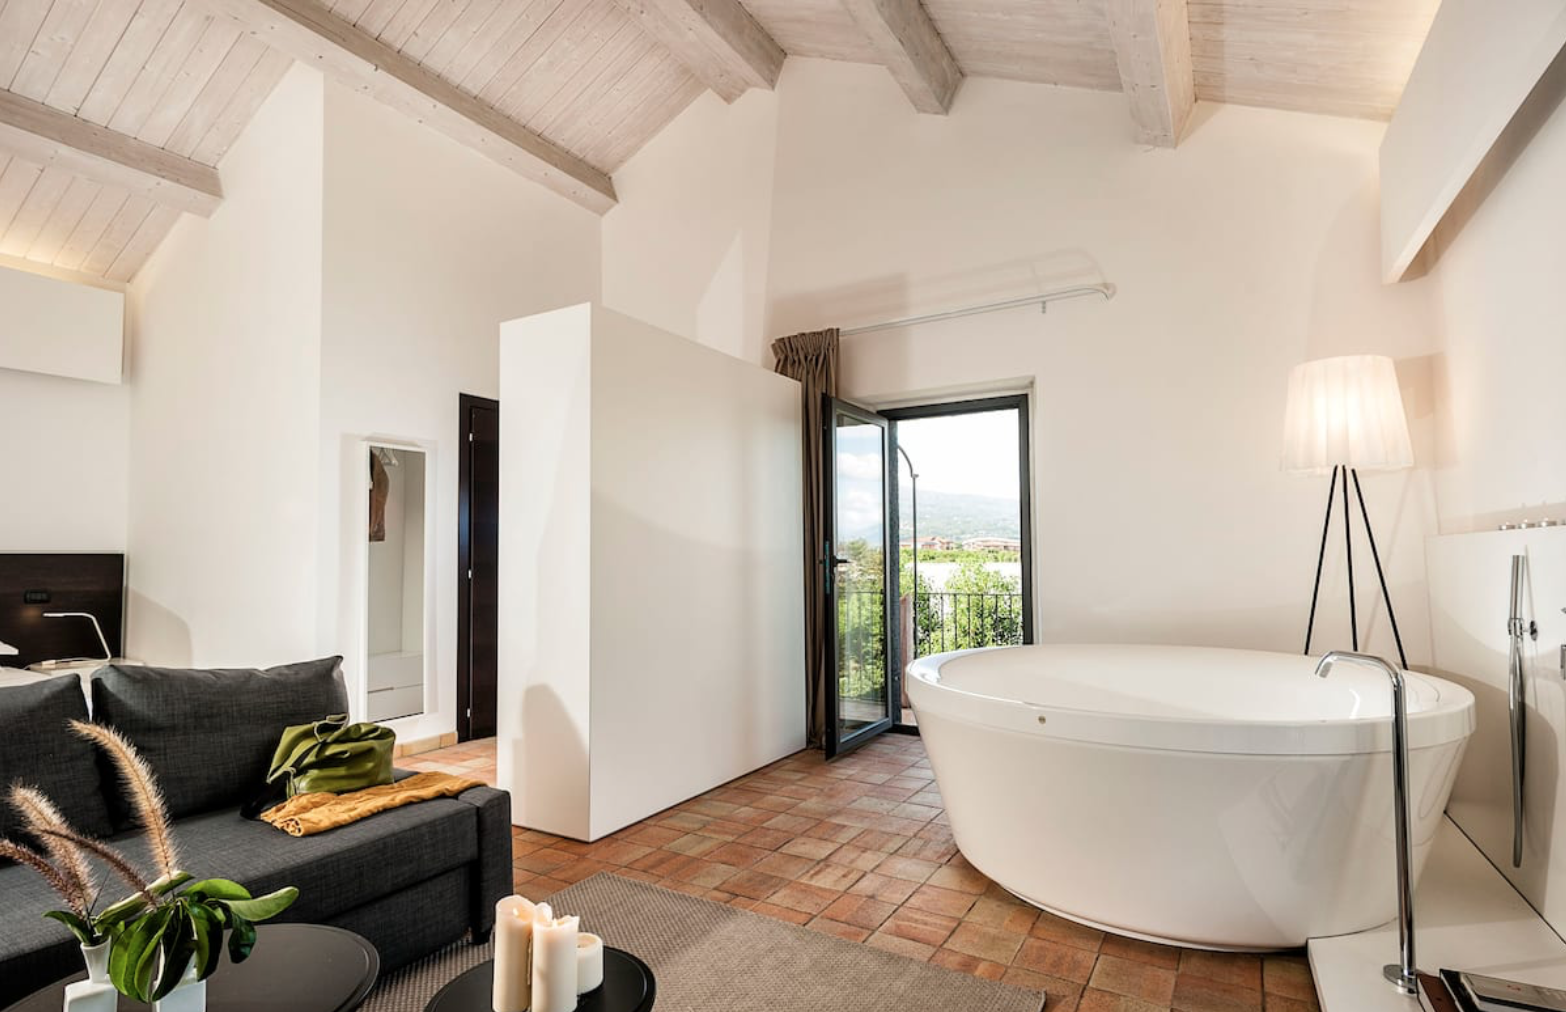 Junior Suite with Round Stone Bathtub in-room at Ramo d'aria country hotel villa on Airbnb - rent an entire 12 bedroom villa hotel in Giarre, Sicily, Italy